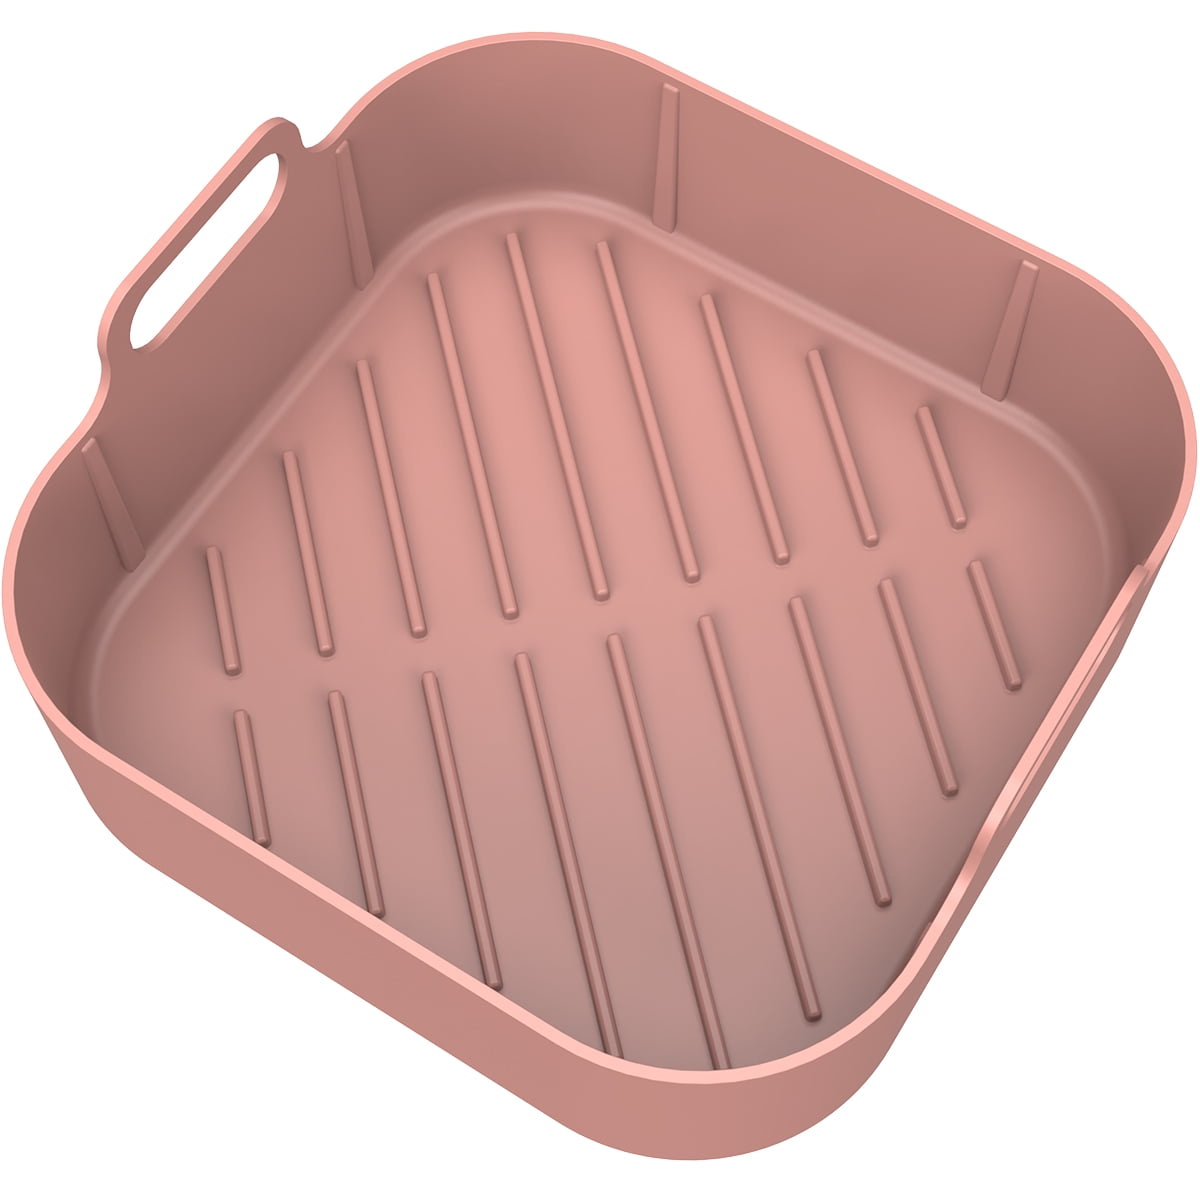 Square Air Fryer Silicone Pot Non-Stick Bakeware Cake Pastry Tray Double  Handles Reusable Baking Pan Mat Kitchen Accessories